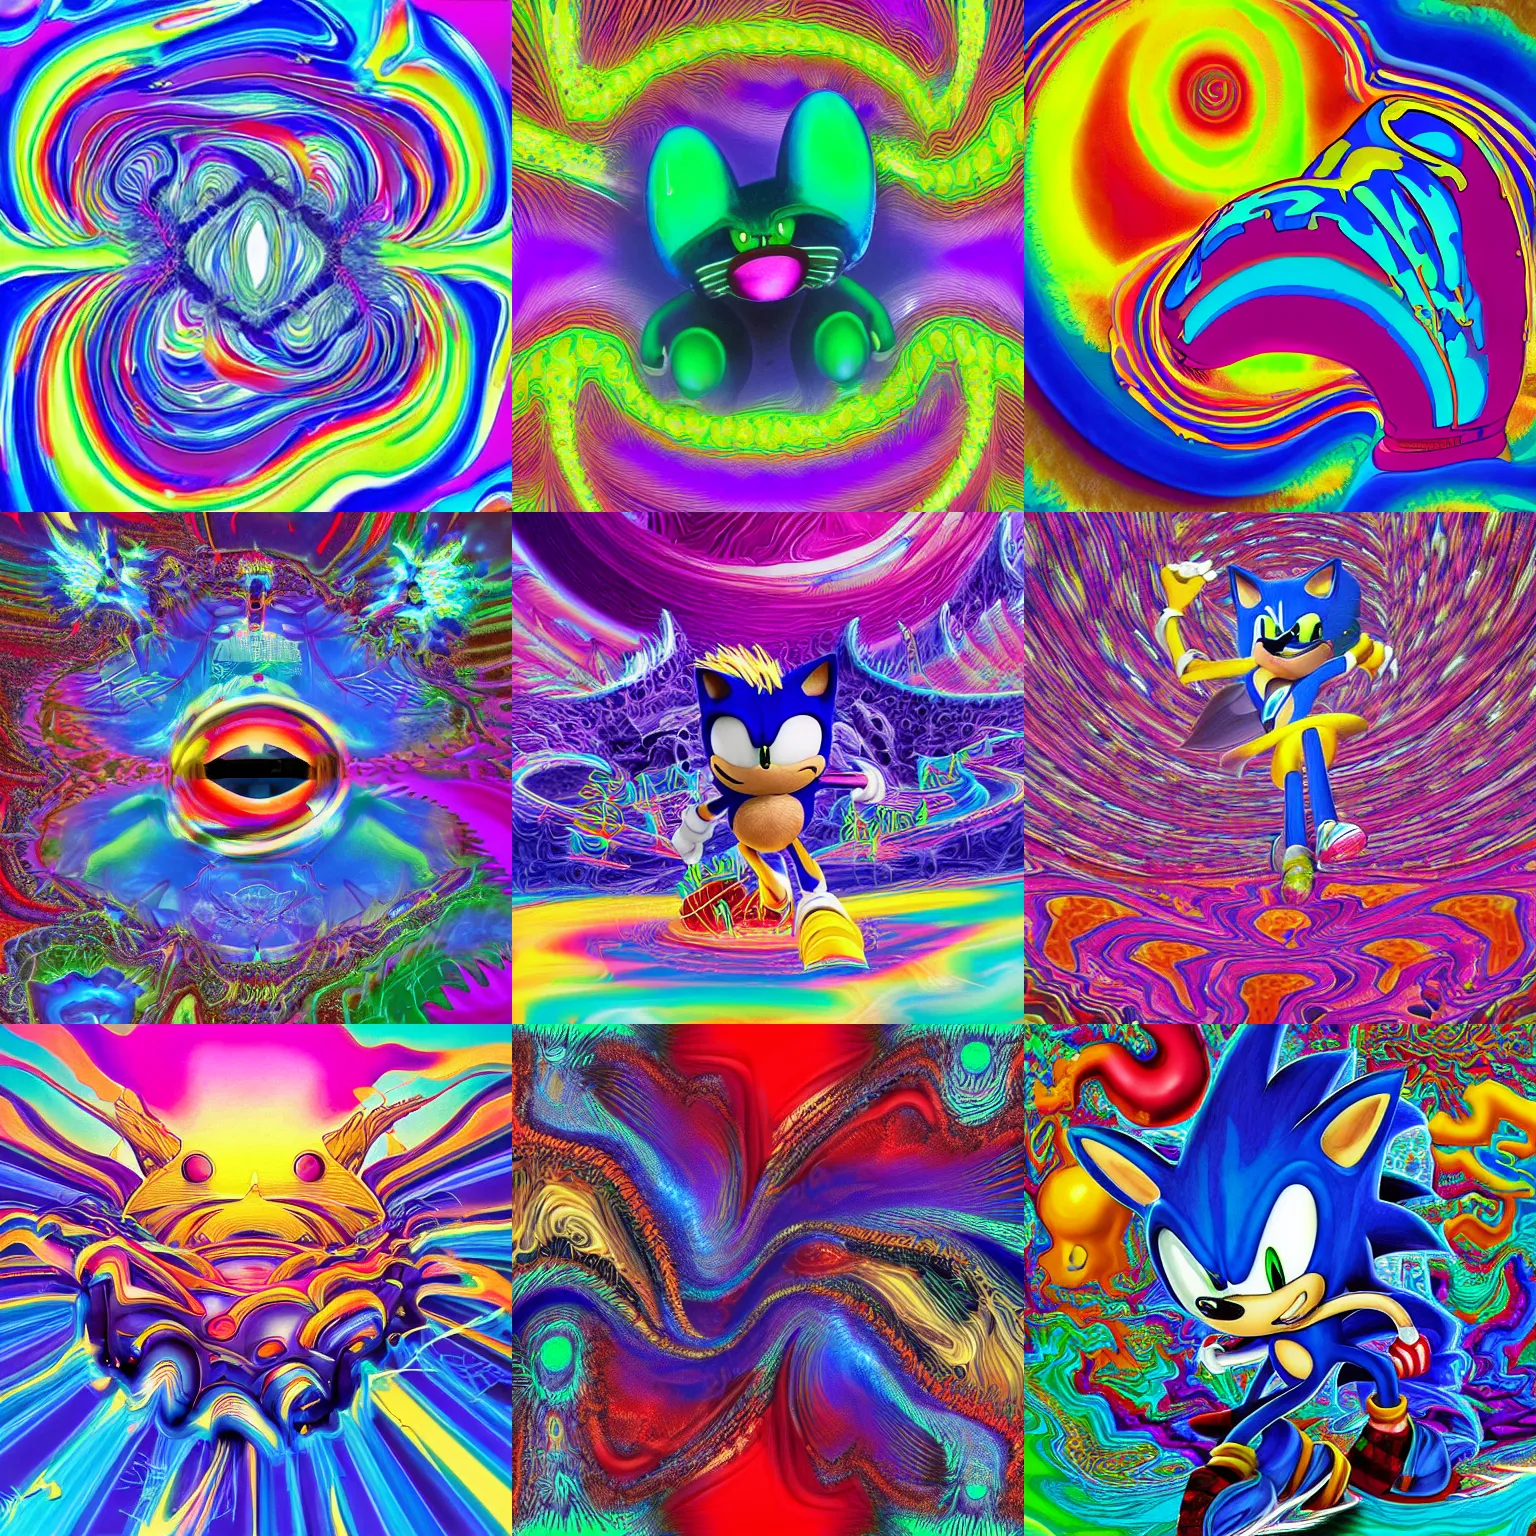 Prompt: surreal, sonic hedgehog, hopalong fractal, detailed professional, high quality portrait sonic airbrush art tame impala album cover portrait of a liquid dissolving LSD DMT sonic the hedgehog surfing through cyberspace, purple checkerboard background, 1990s 1992 Sega Genesis video game album cover